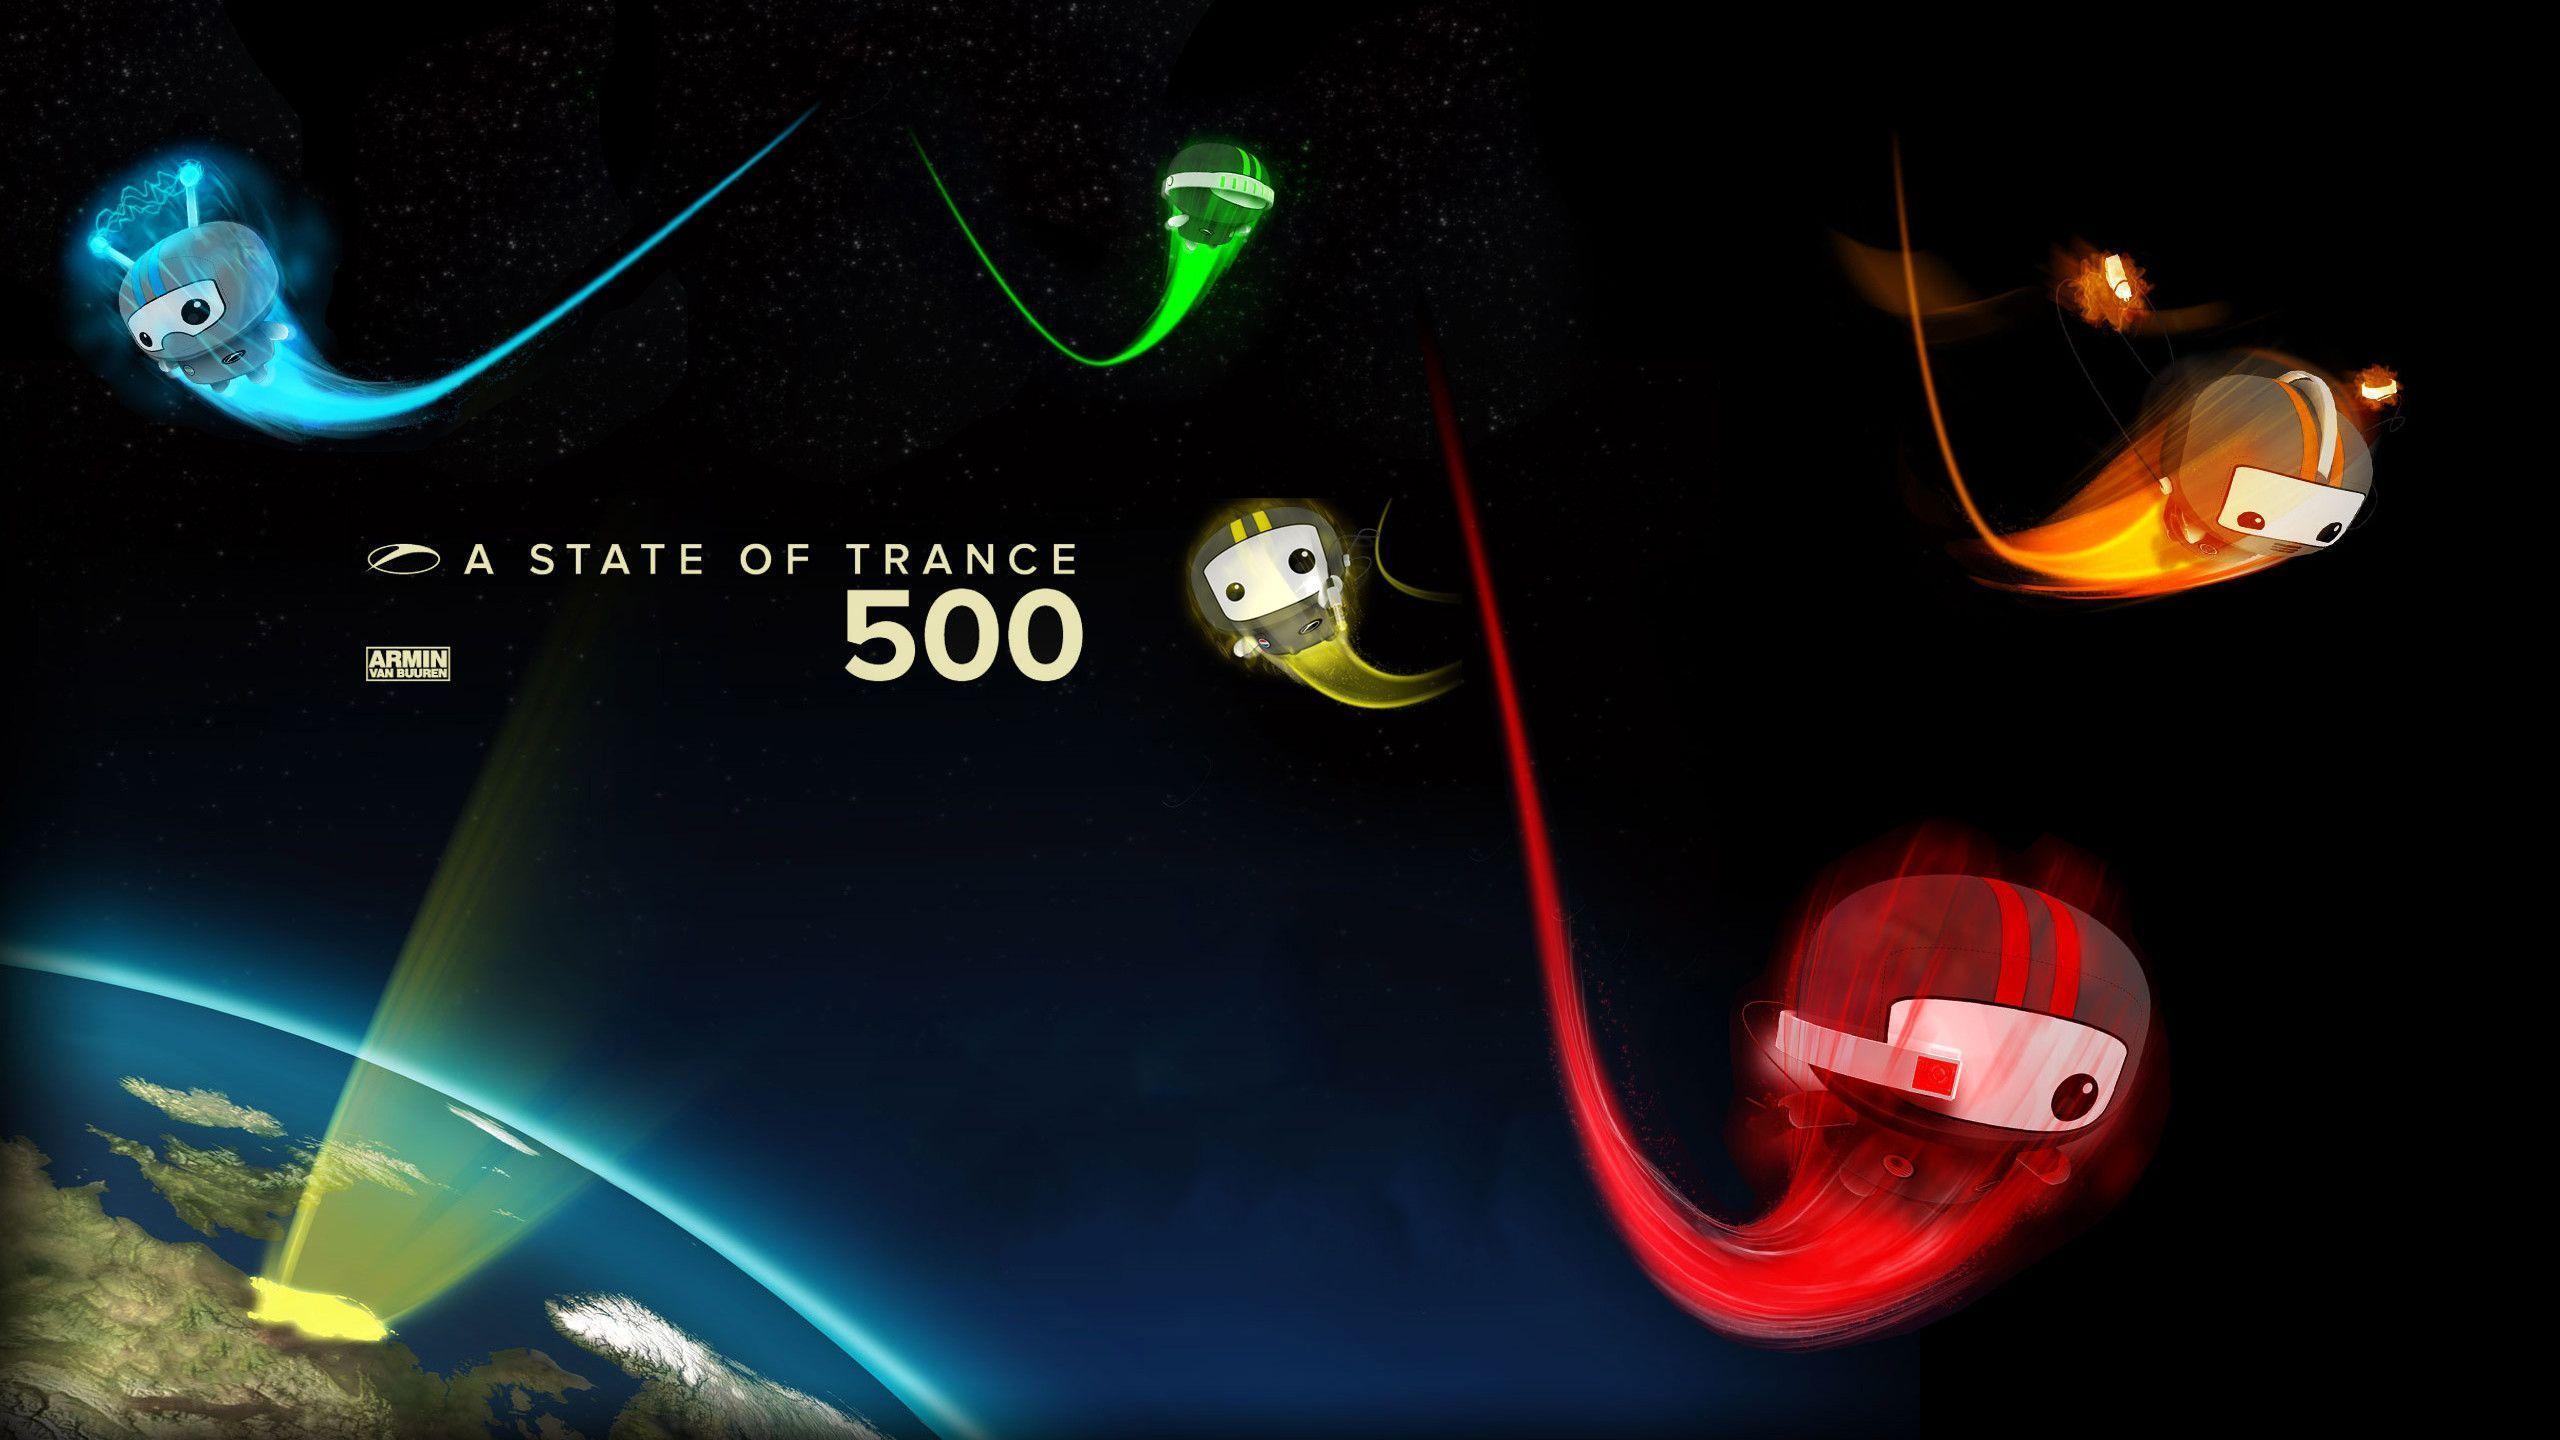 A State Of Trance Wallpaper HD A State Of Trance 500 HD Wall